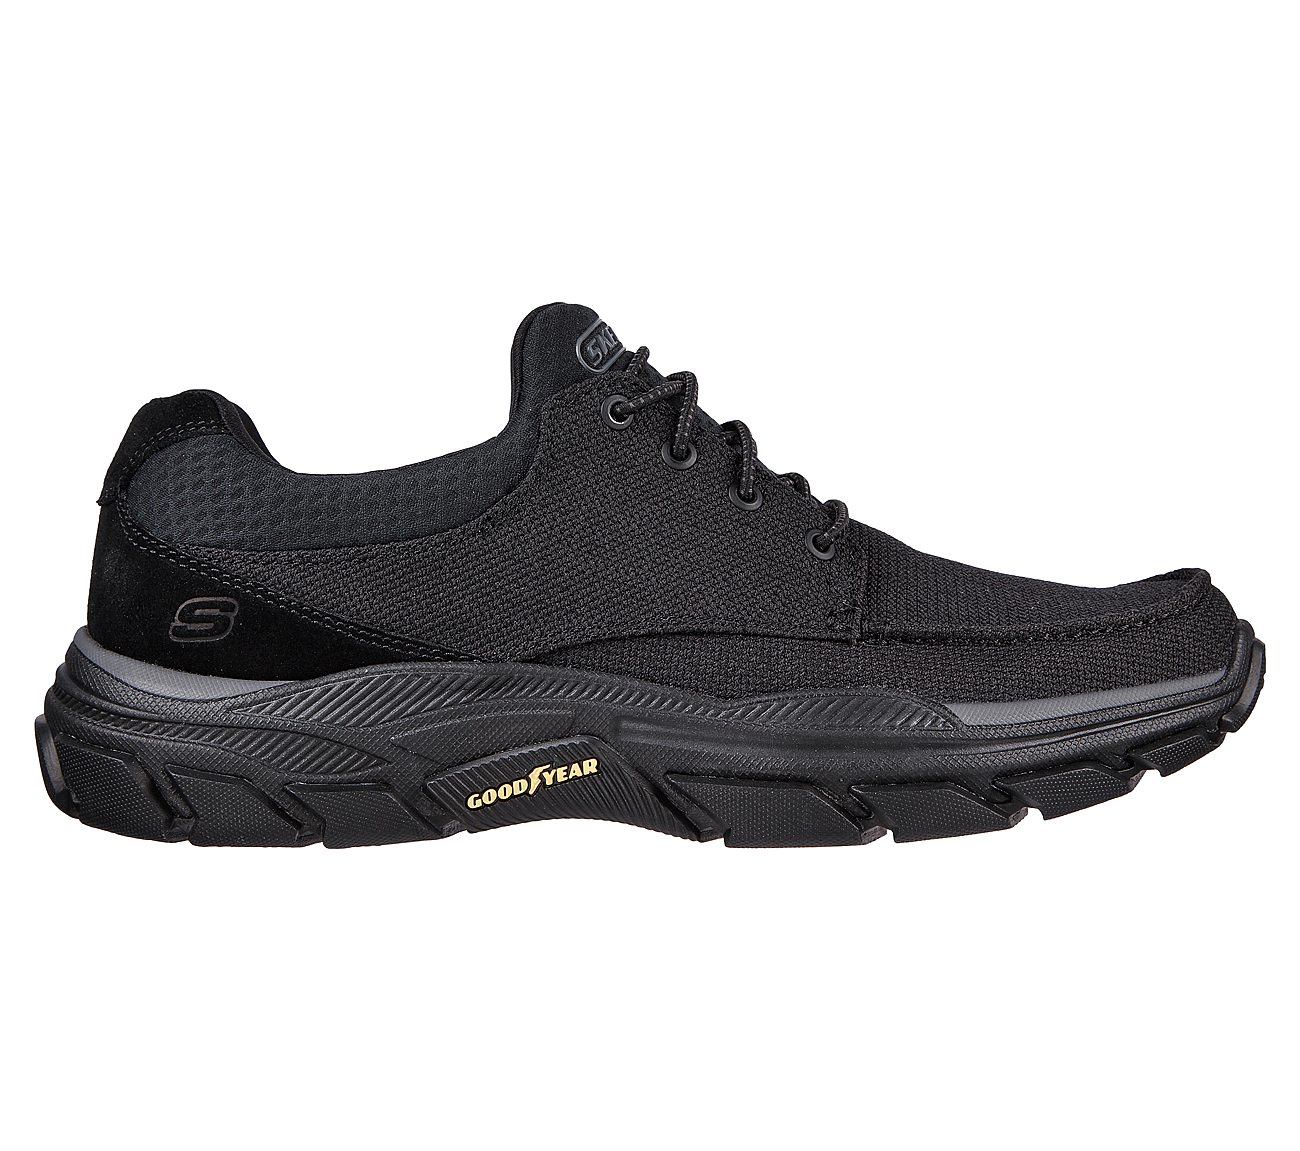 RESPECTED - SARTELL, BBBBLACK Footwear Lateral View